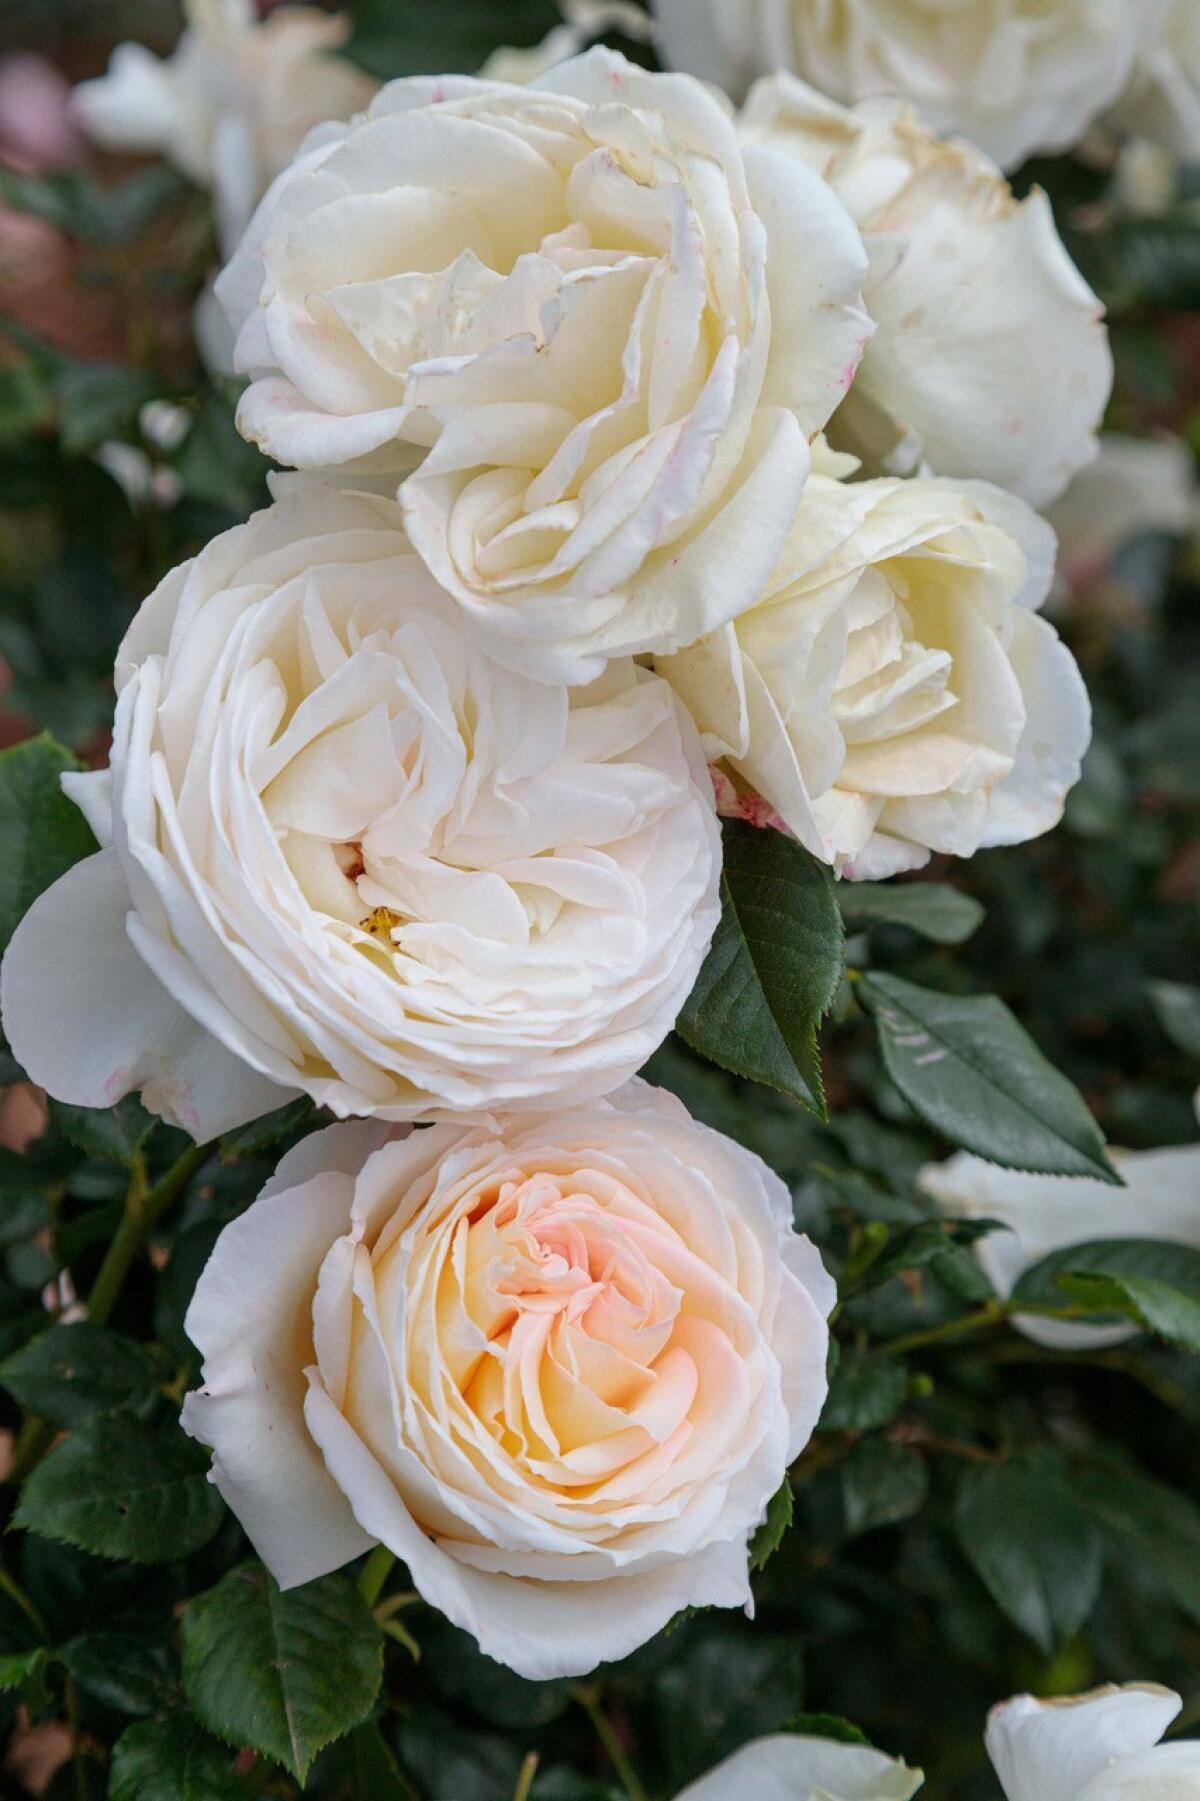 Yearly release of new hybridized roses like a special holiday gift - The  San Diego Union-Tribune